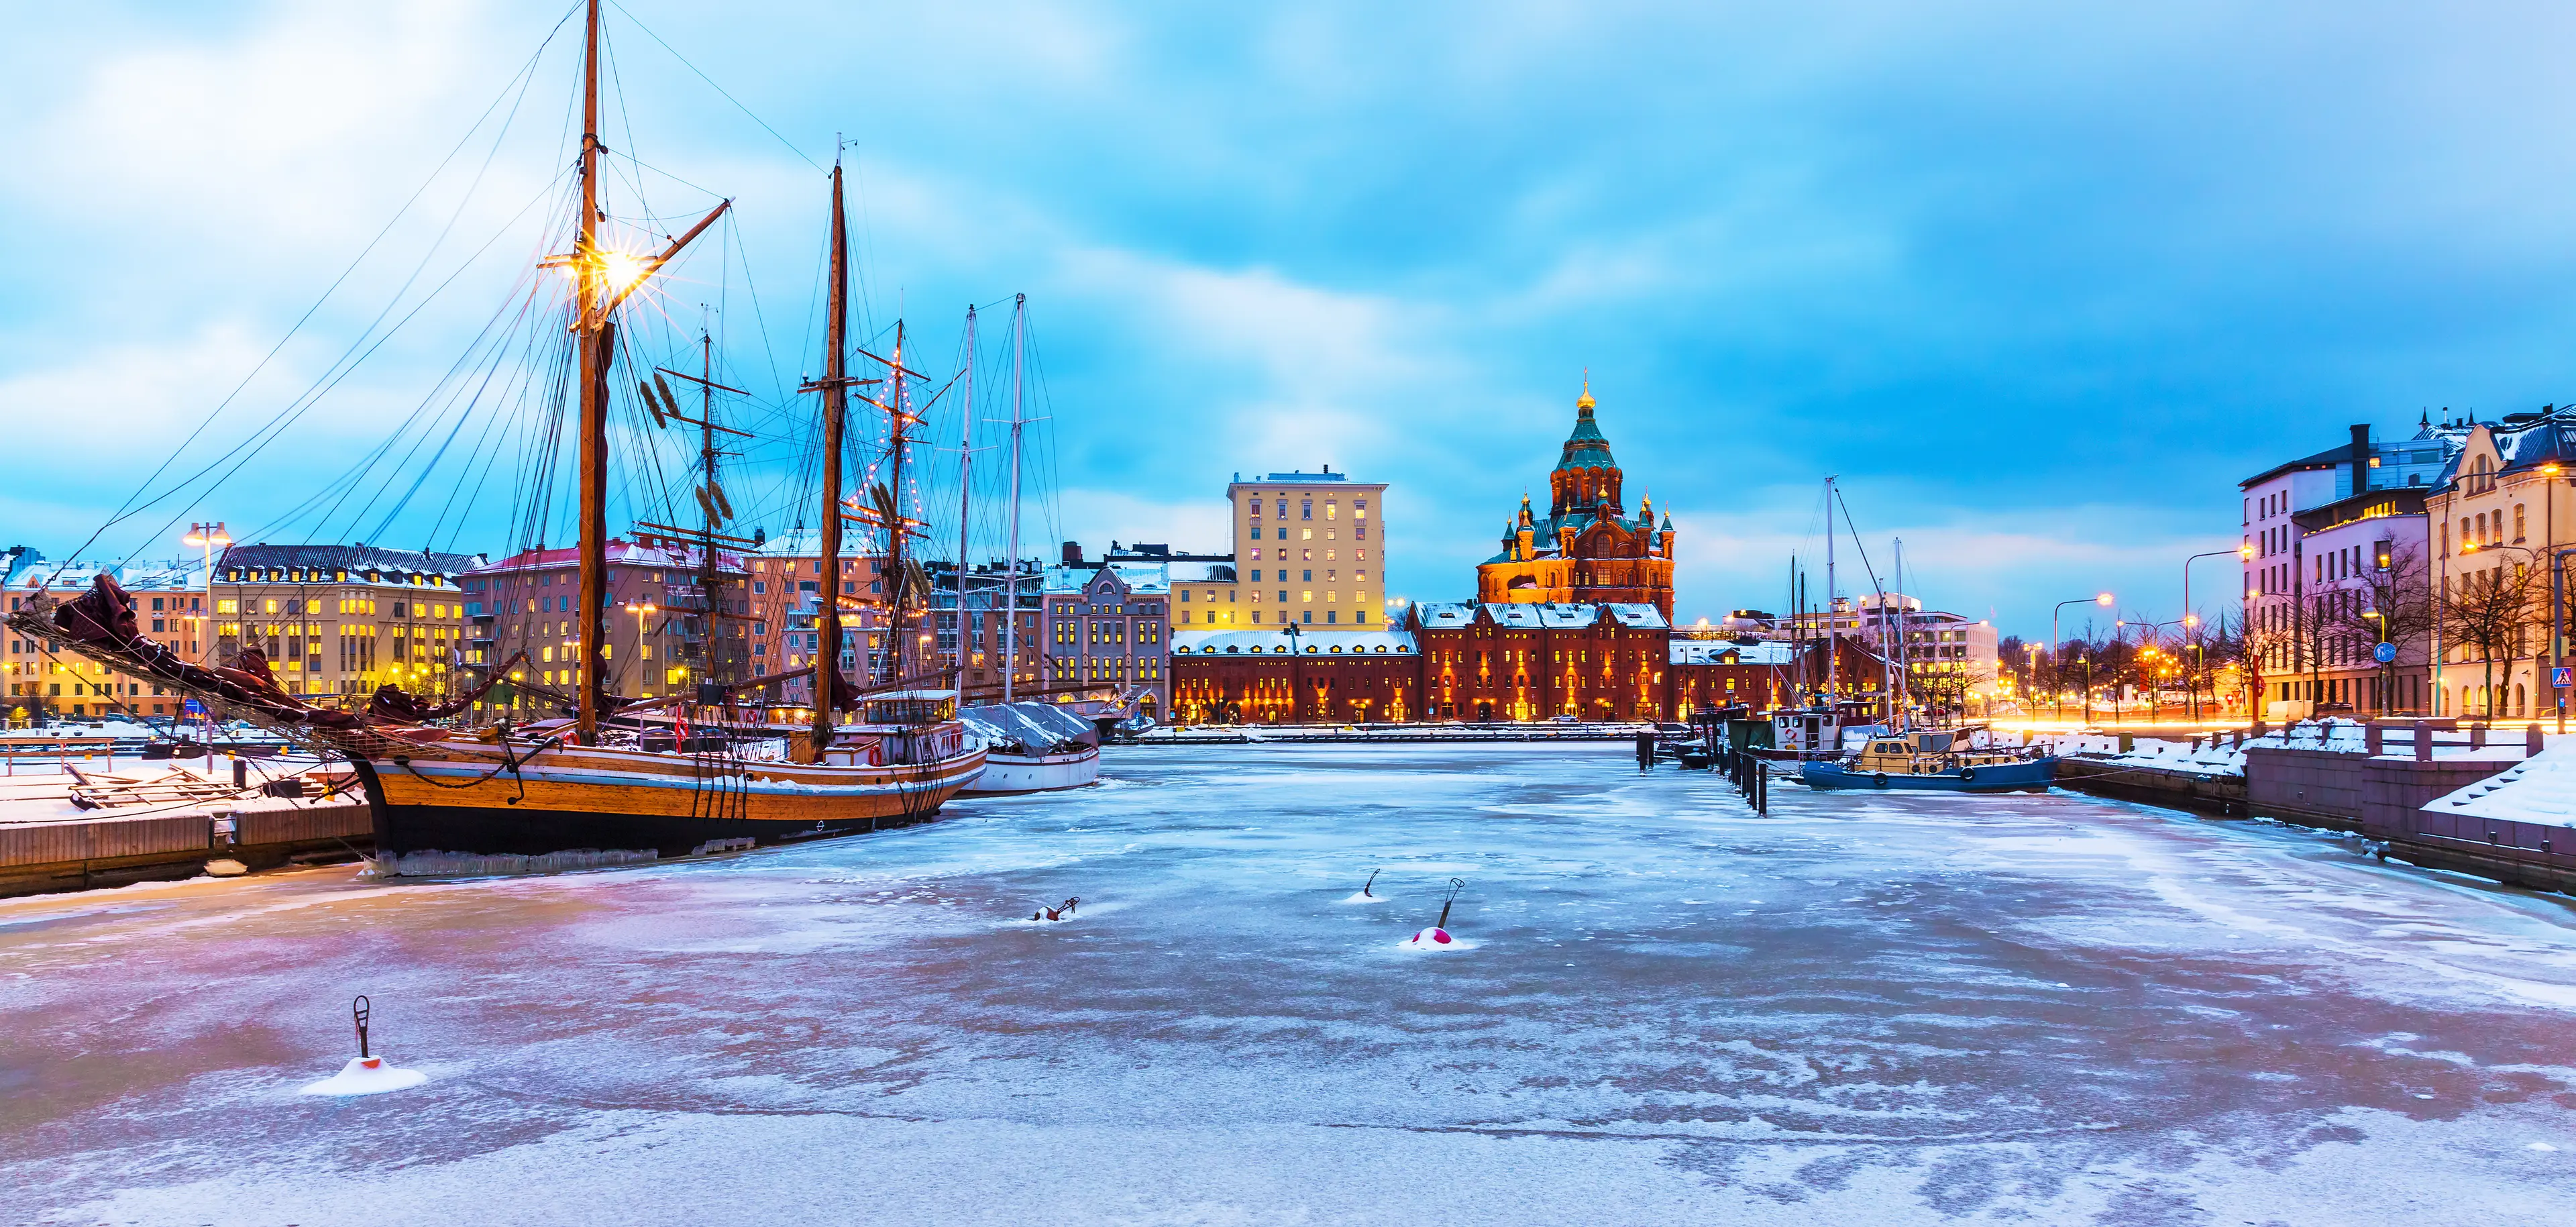 2-Day Ultimate Adventure Guide to Helsinki, Finland